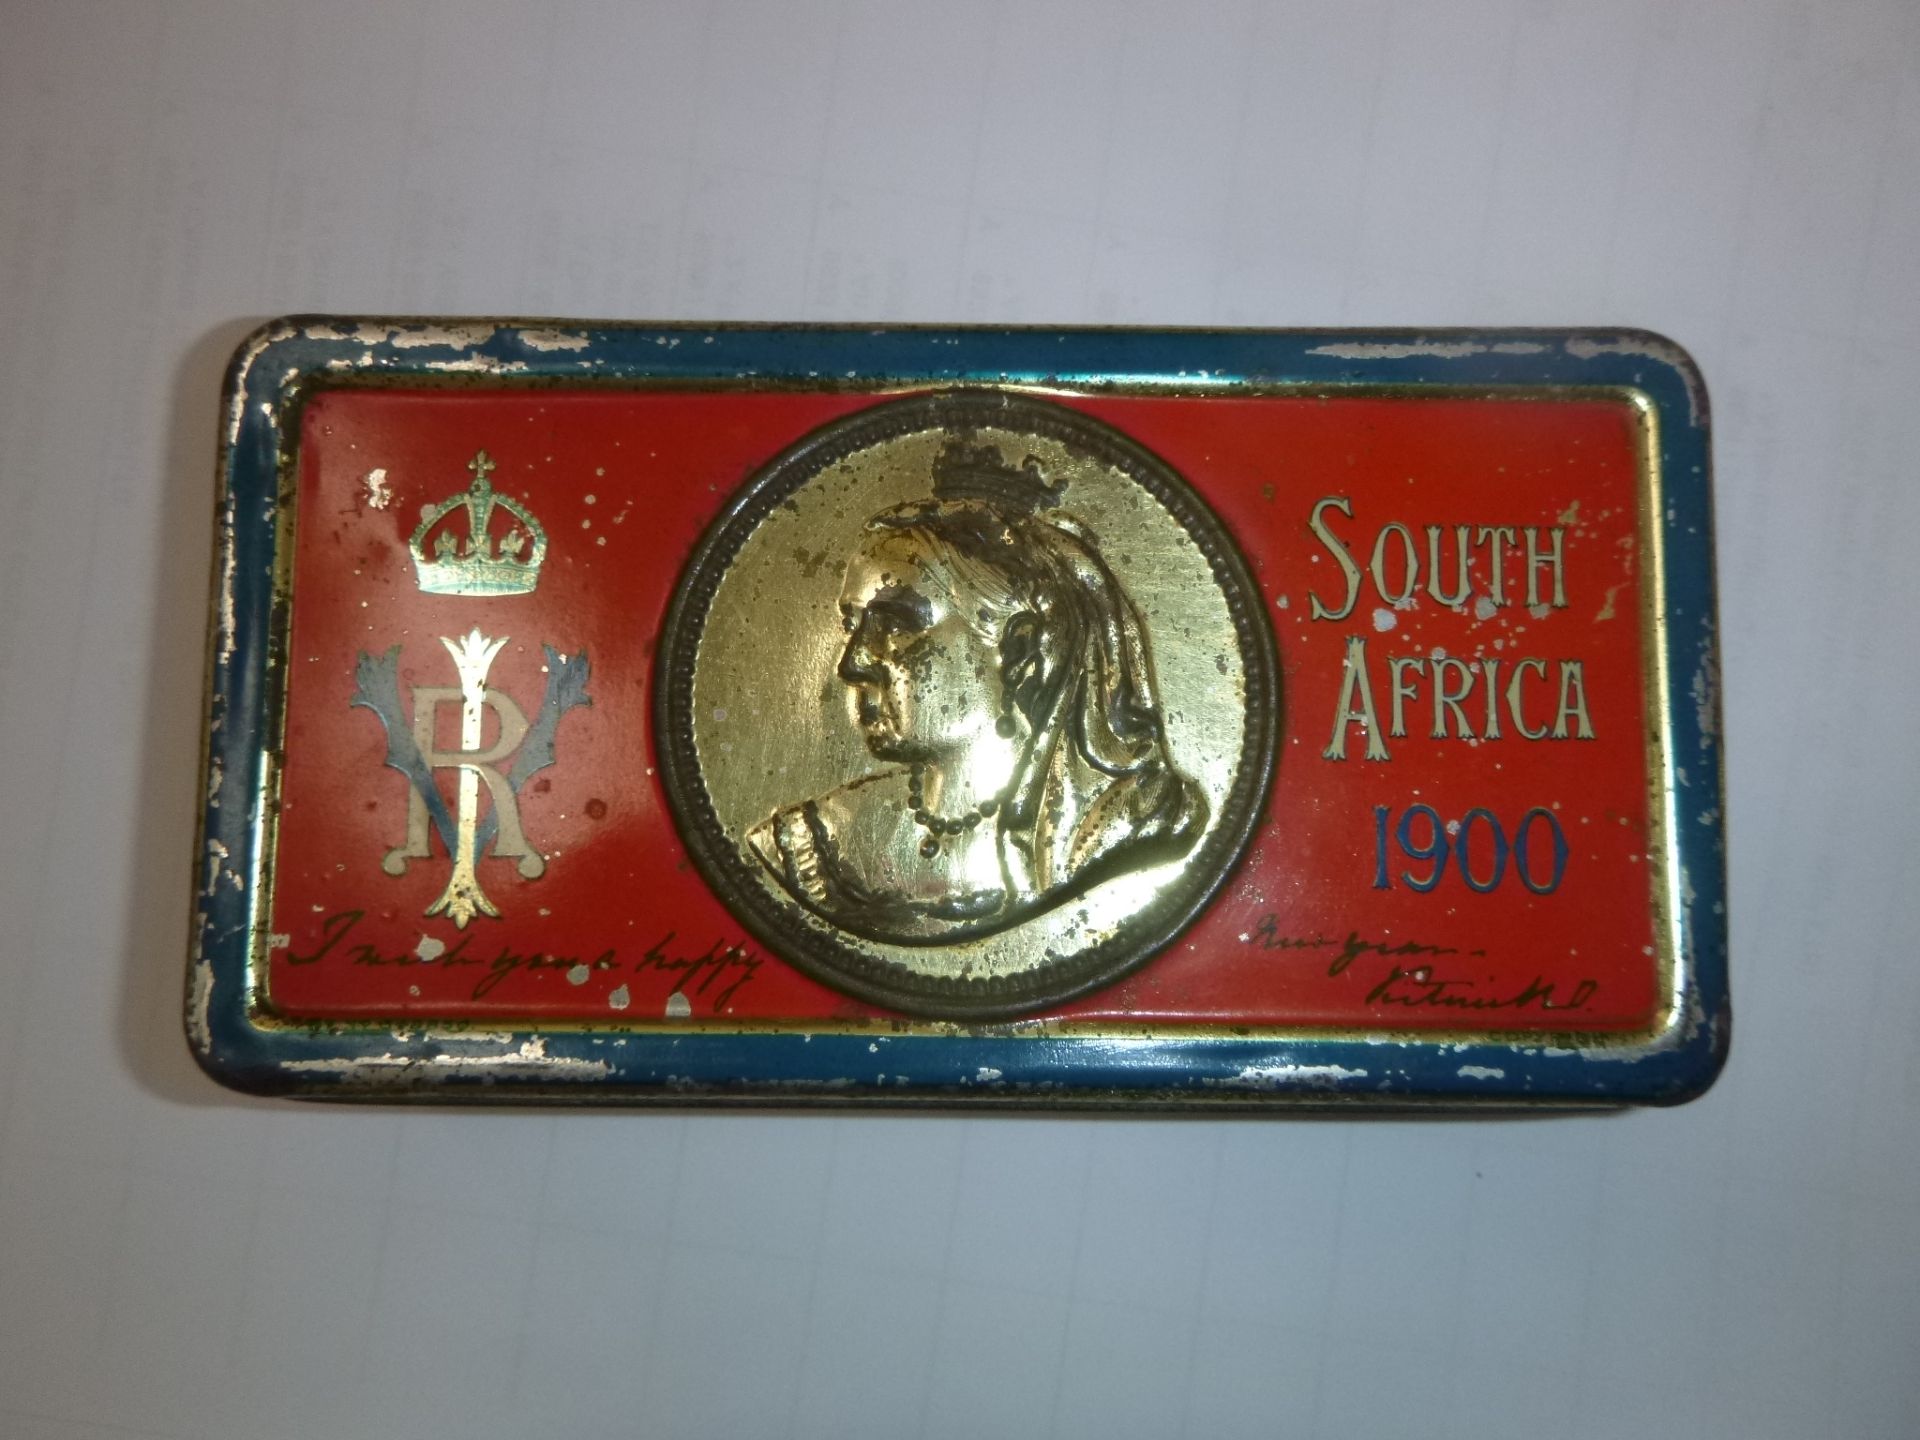 A Queen Victoria Chocolate Tin, South Africa 1900. The lid of the tin is painted red, gold and blue.